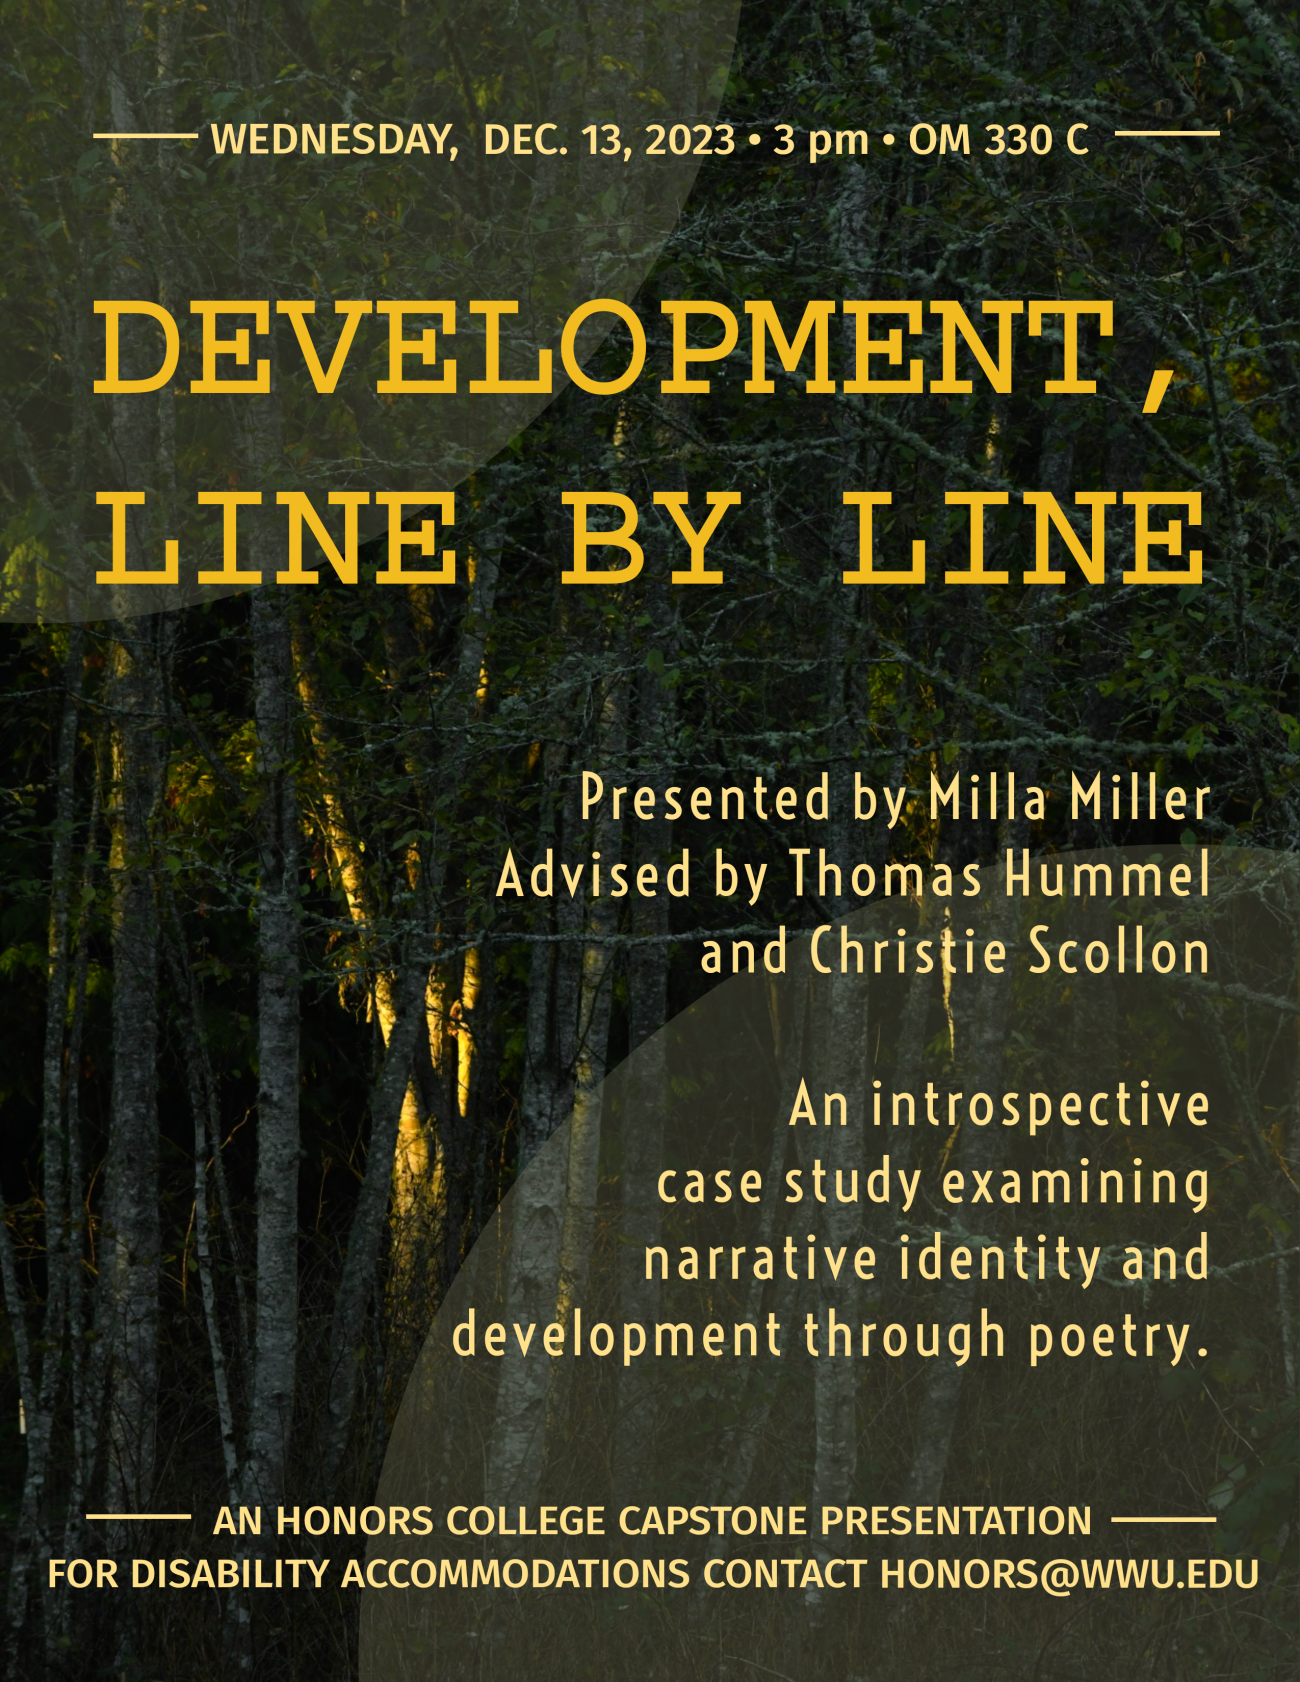 Image reads in yellow lettering: Wednesday, December 13th, 2023 at 3 pm in Old Main Room 330C. Project is titled, “Development, Line by Line” by Milla Miller and advised by Thomas Hummel and Christie Scollon. Image then reads: An introspective case study examining narrative identity and development though poetry. This is an honors college capstone presentation. For disability accomodations please contact honors@wwu.edu. The background of the image is a group of thin trees.